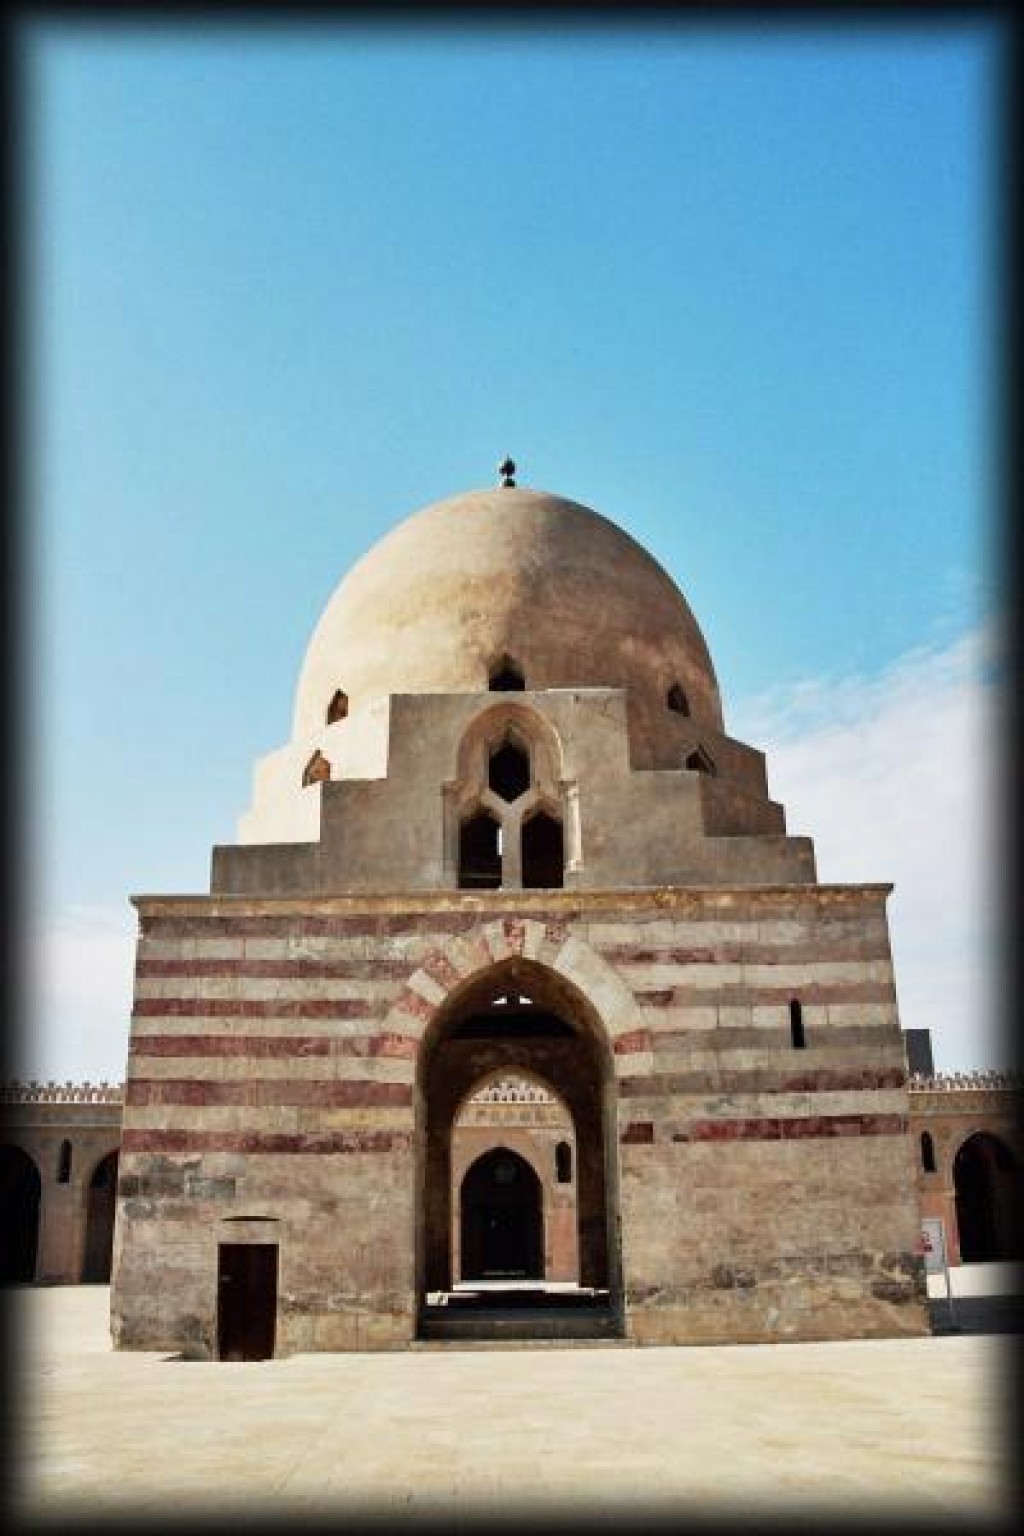 The mosque was completed in 879 AD on Mount Yashkur in a settlement named al-Qata'i by the founder of Egypt's Tulunid Dynasty (868-905 AD), Ahmad ibn Tulun.